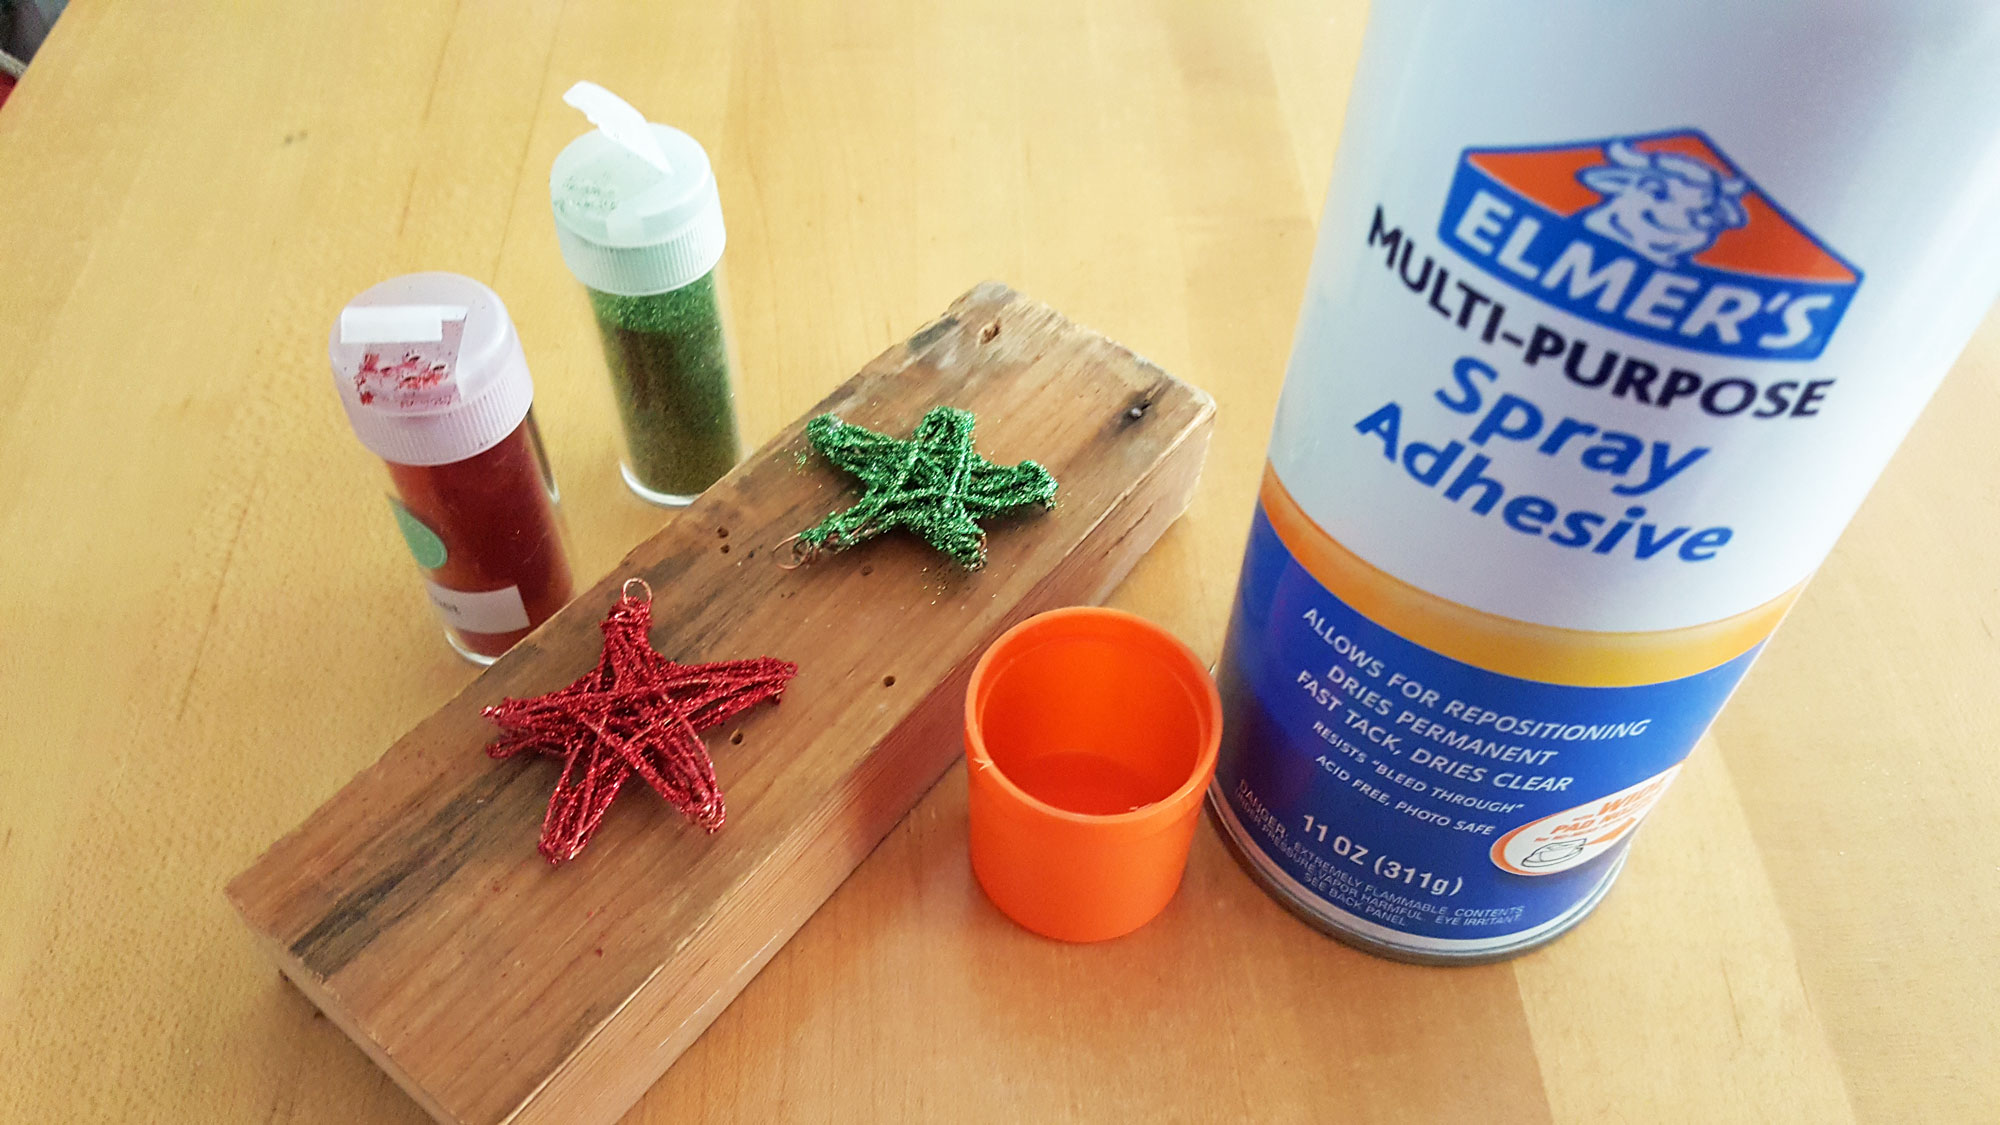 Step 5 is to use spray adhesive to coat the stars, then shake glitter all over them | OrnamentShop.com